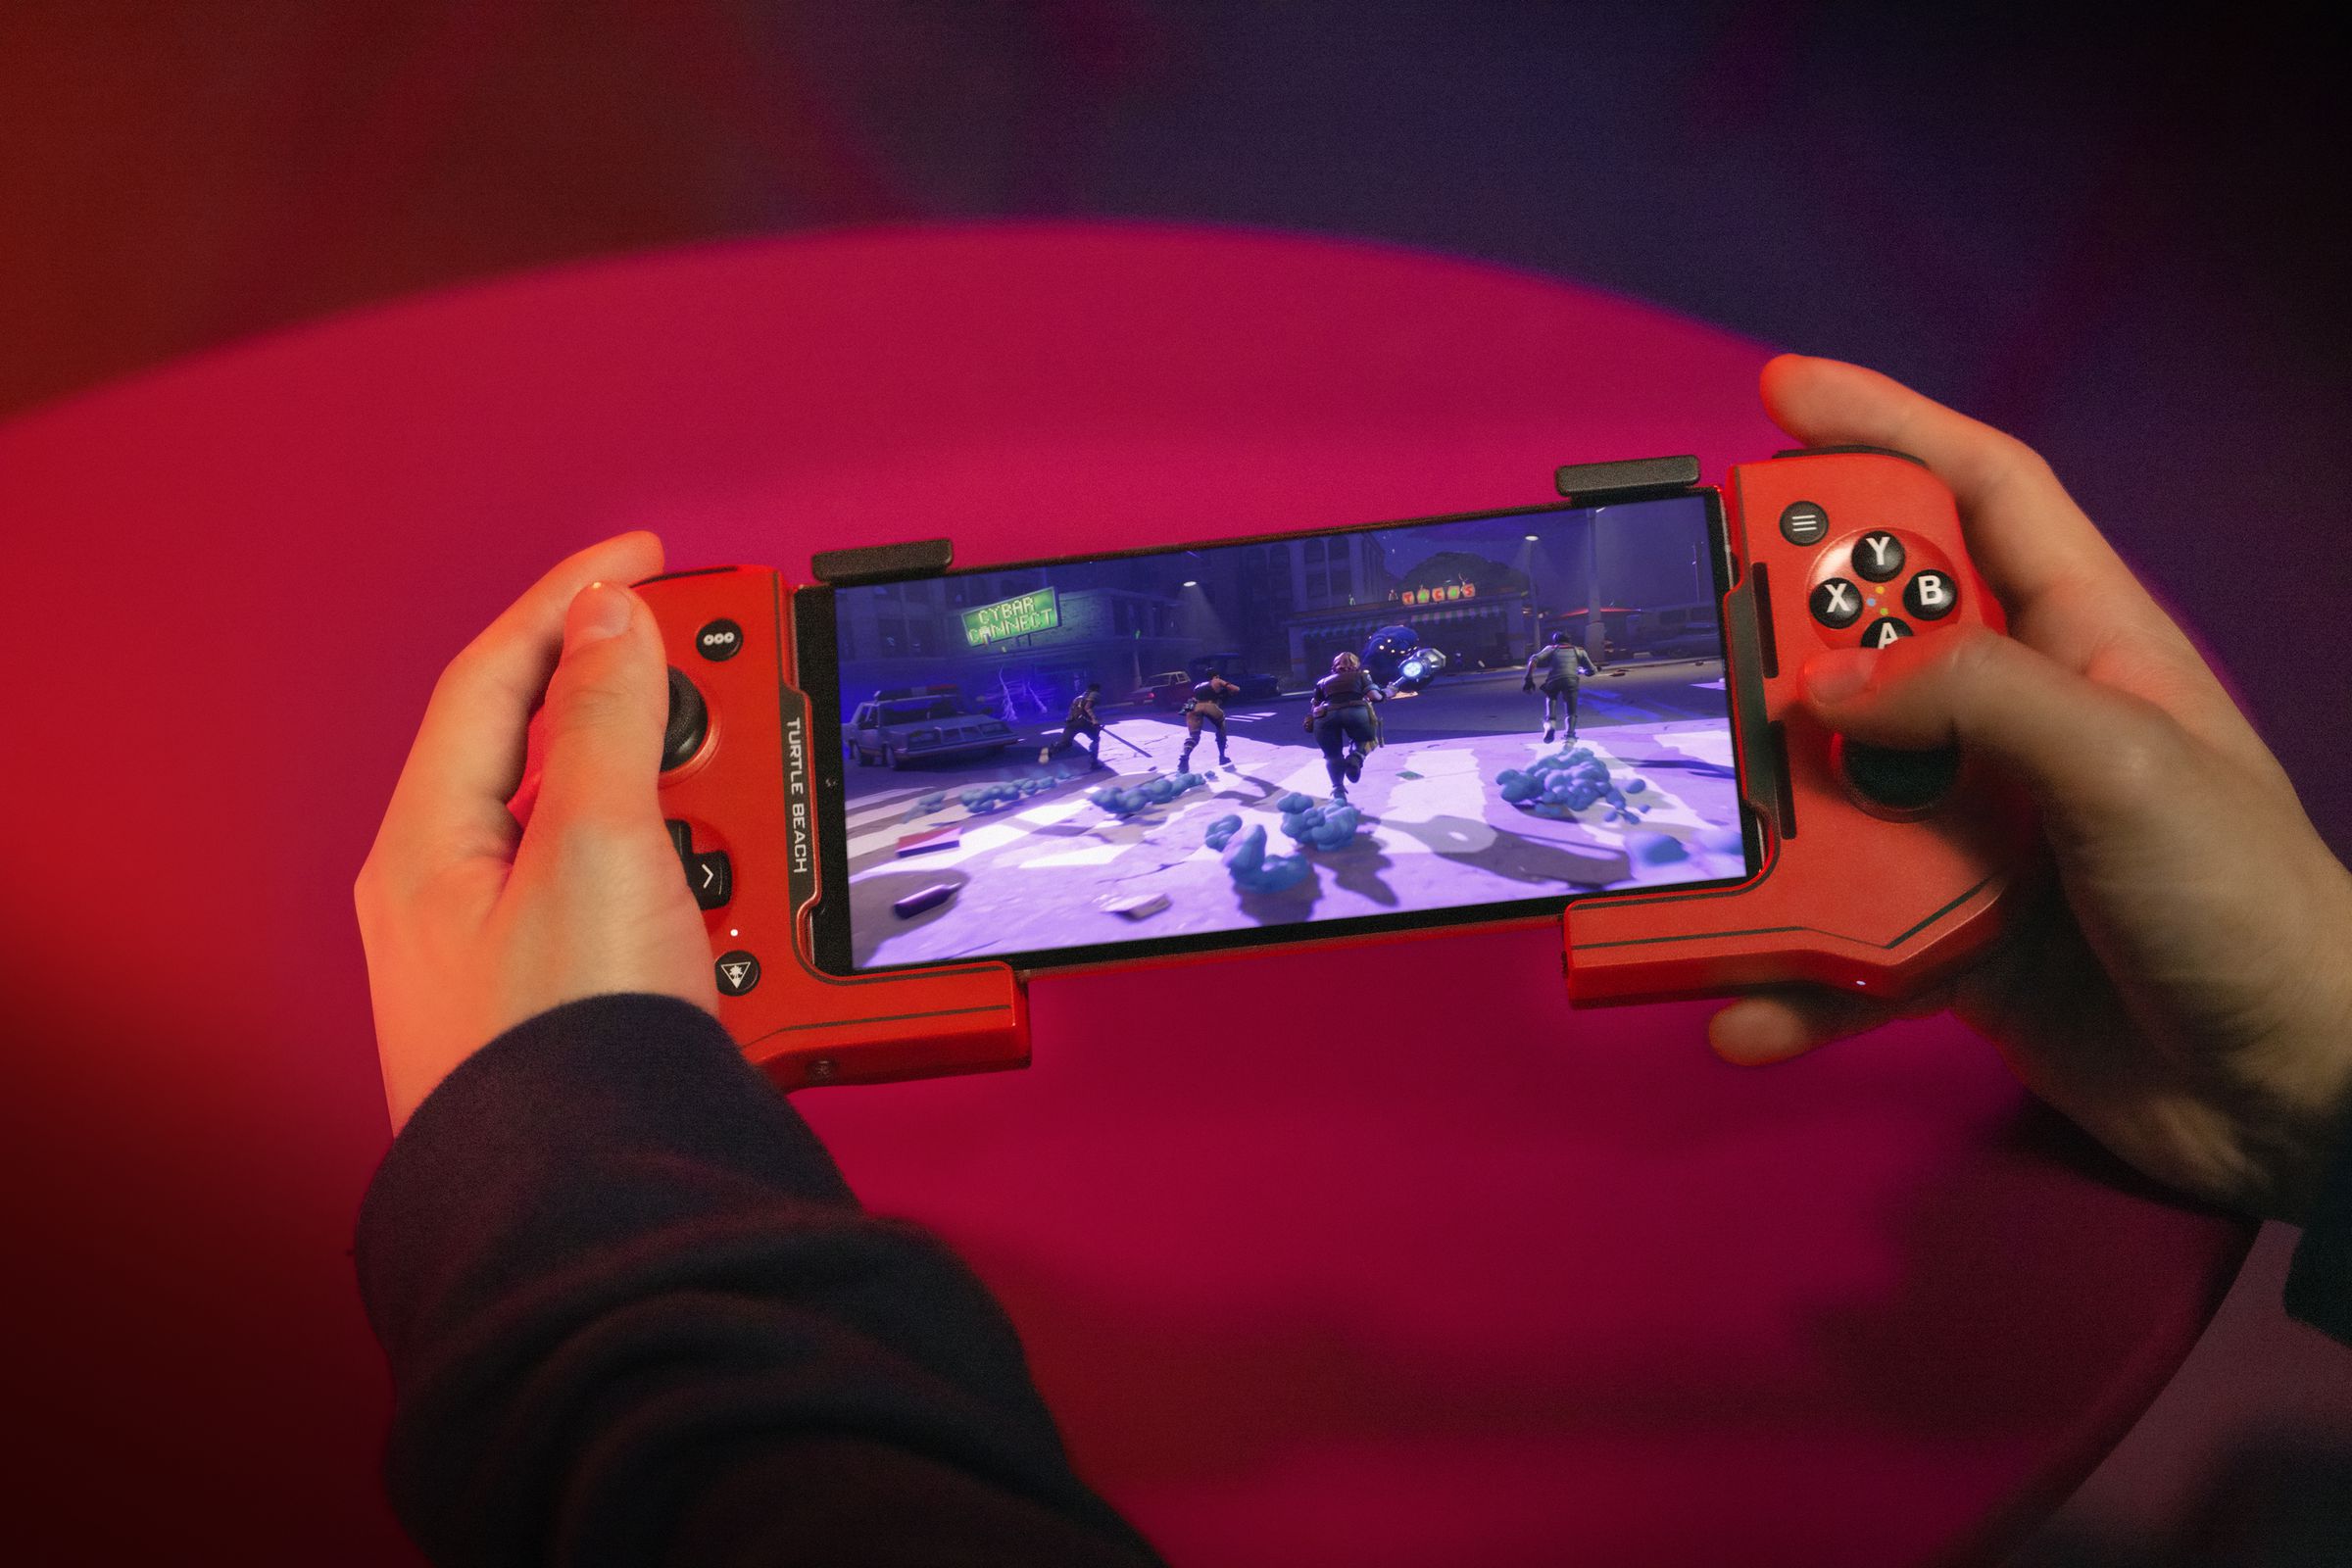 An over-the-shoulder view of a person holding the red Turtle Beach Atom phone controller with an Android smartphone mounted within it, playing a game.